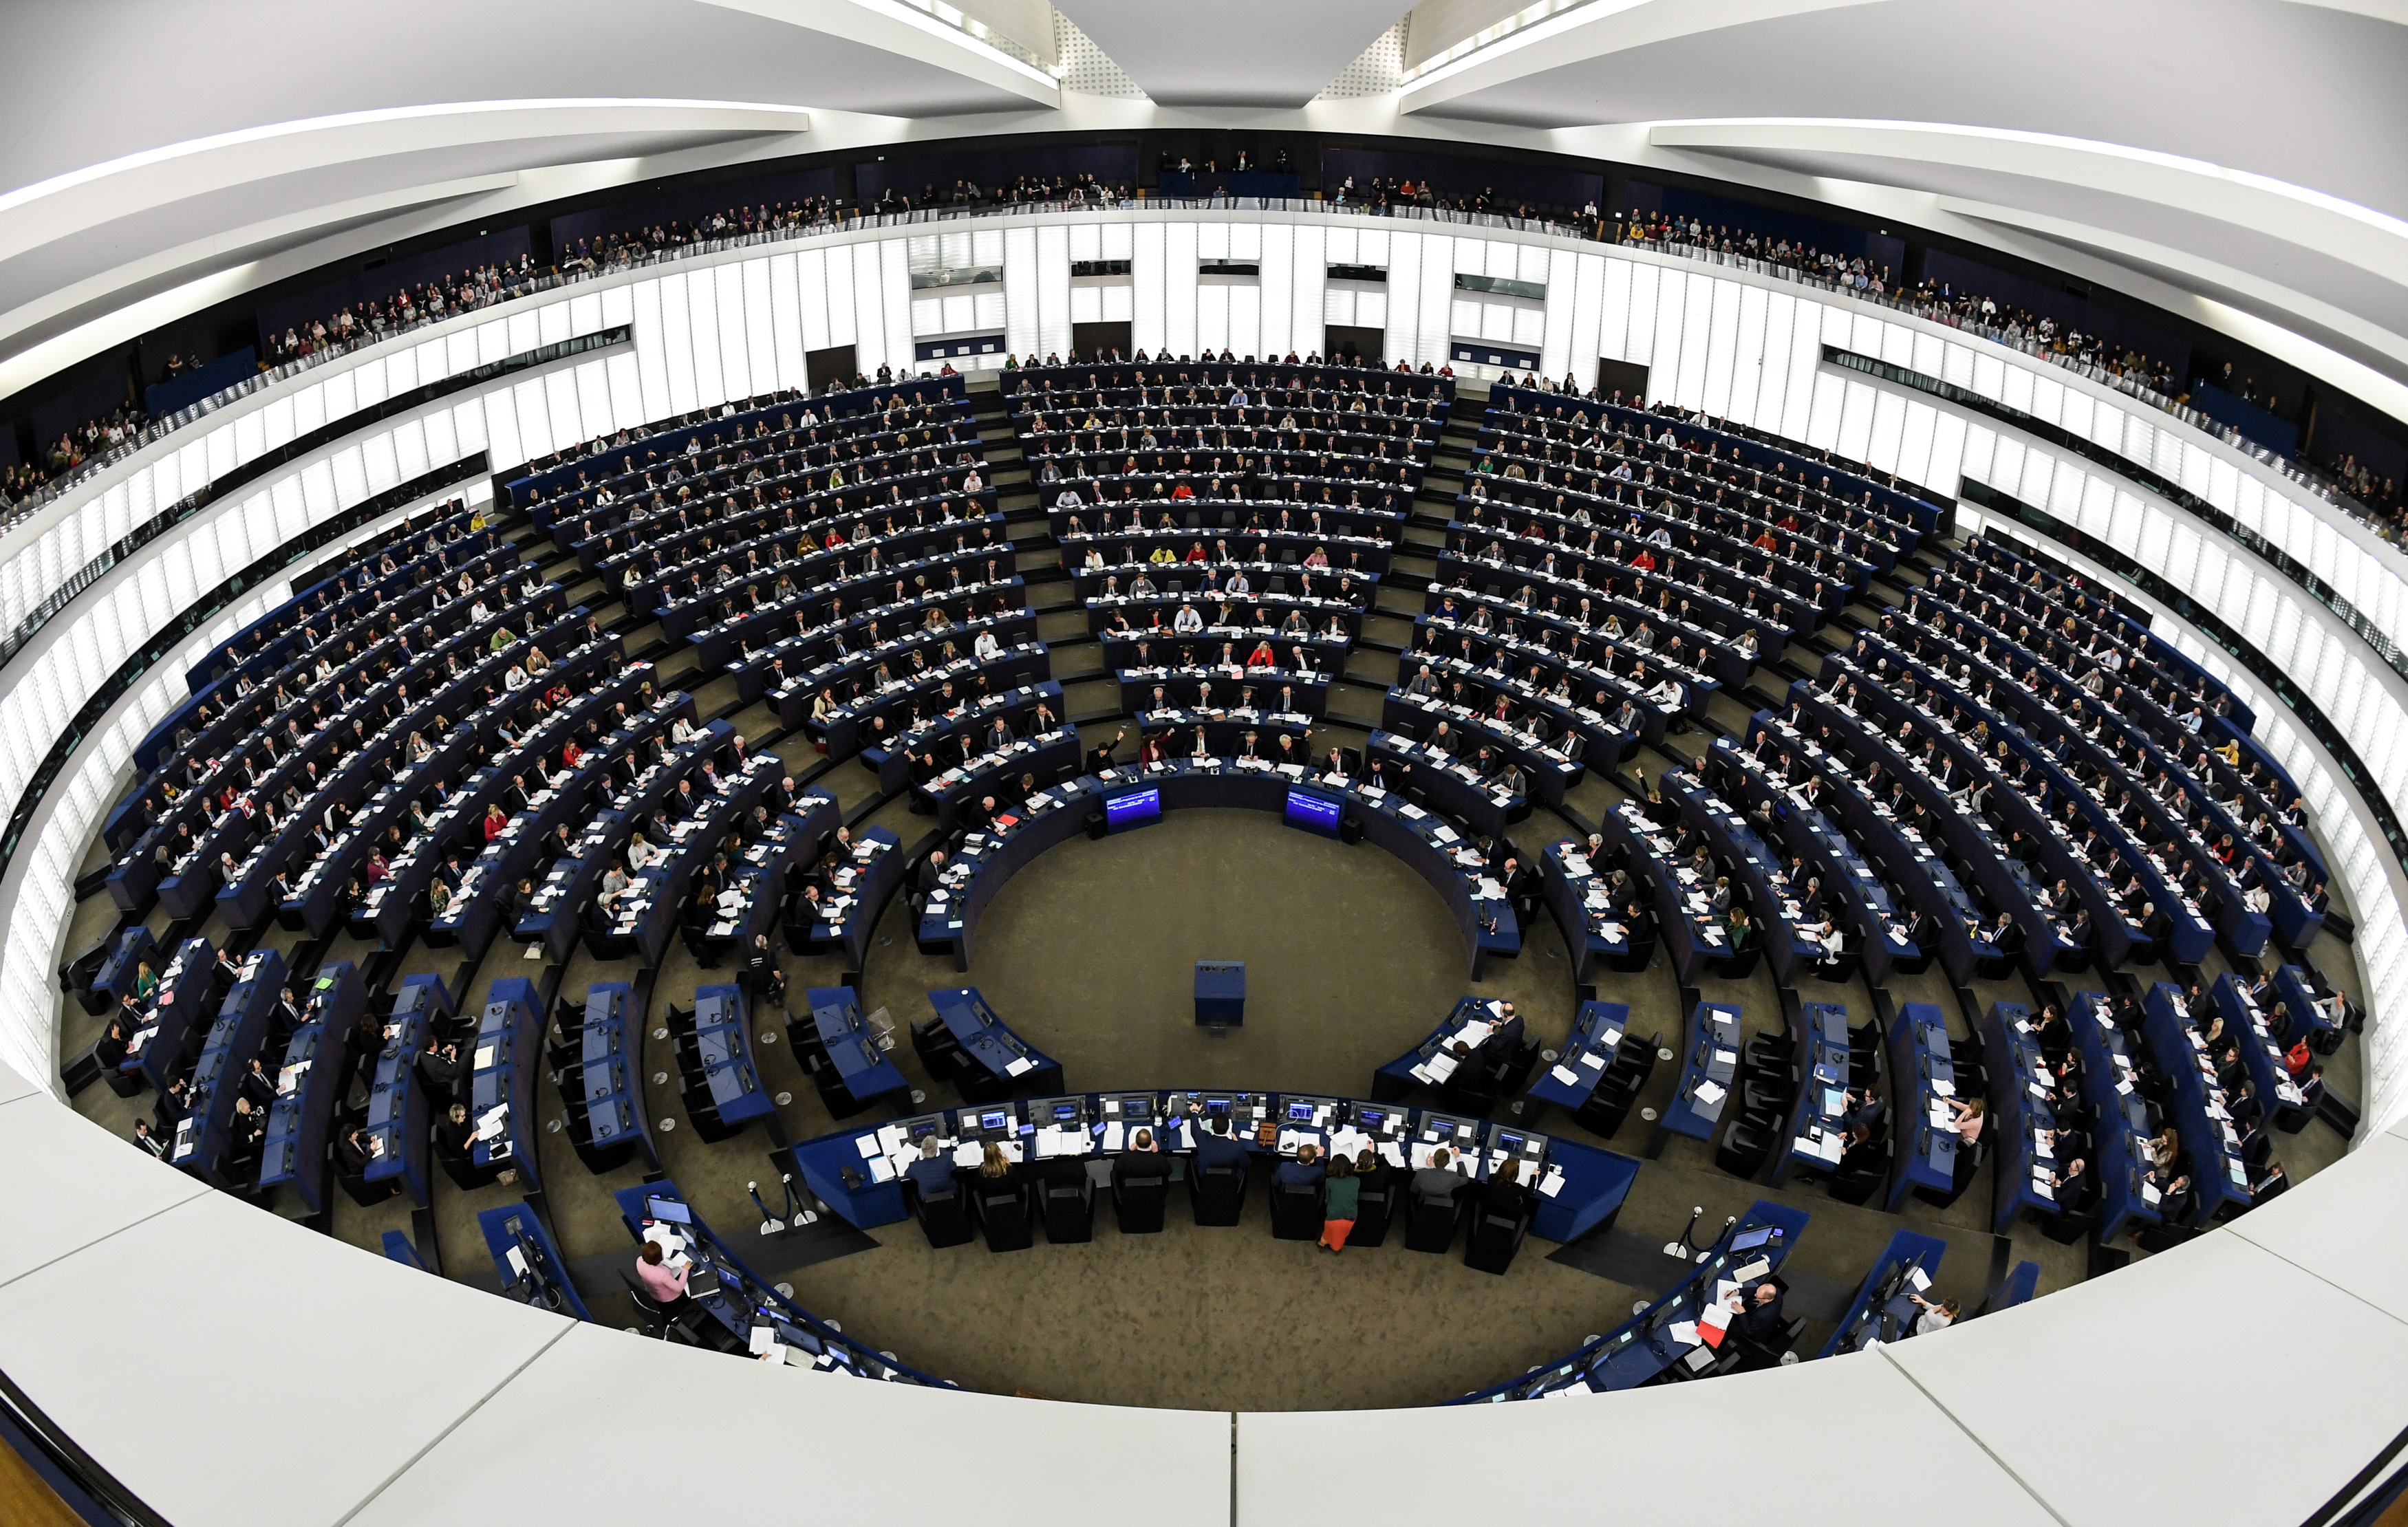 epa07223422 Members of Parliament vote during a plenary session of the European Parliament in Strasbourg, France, 11 December 2018.  EPA/PATRICK SEEGER